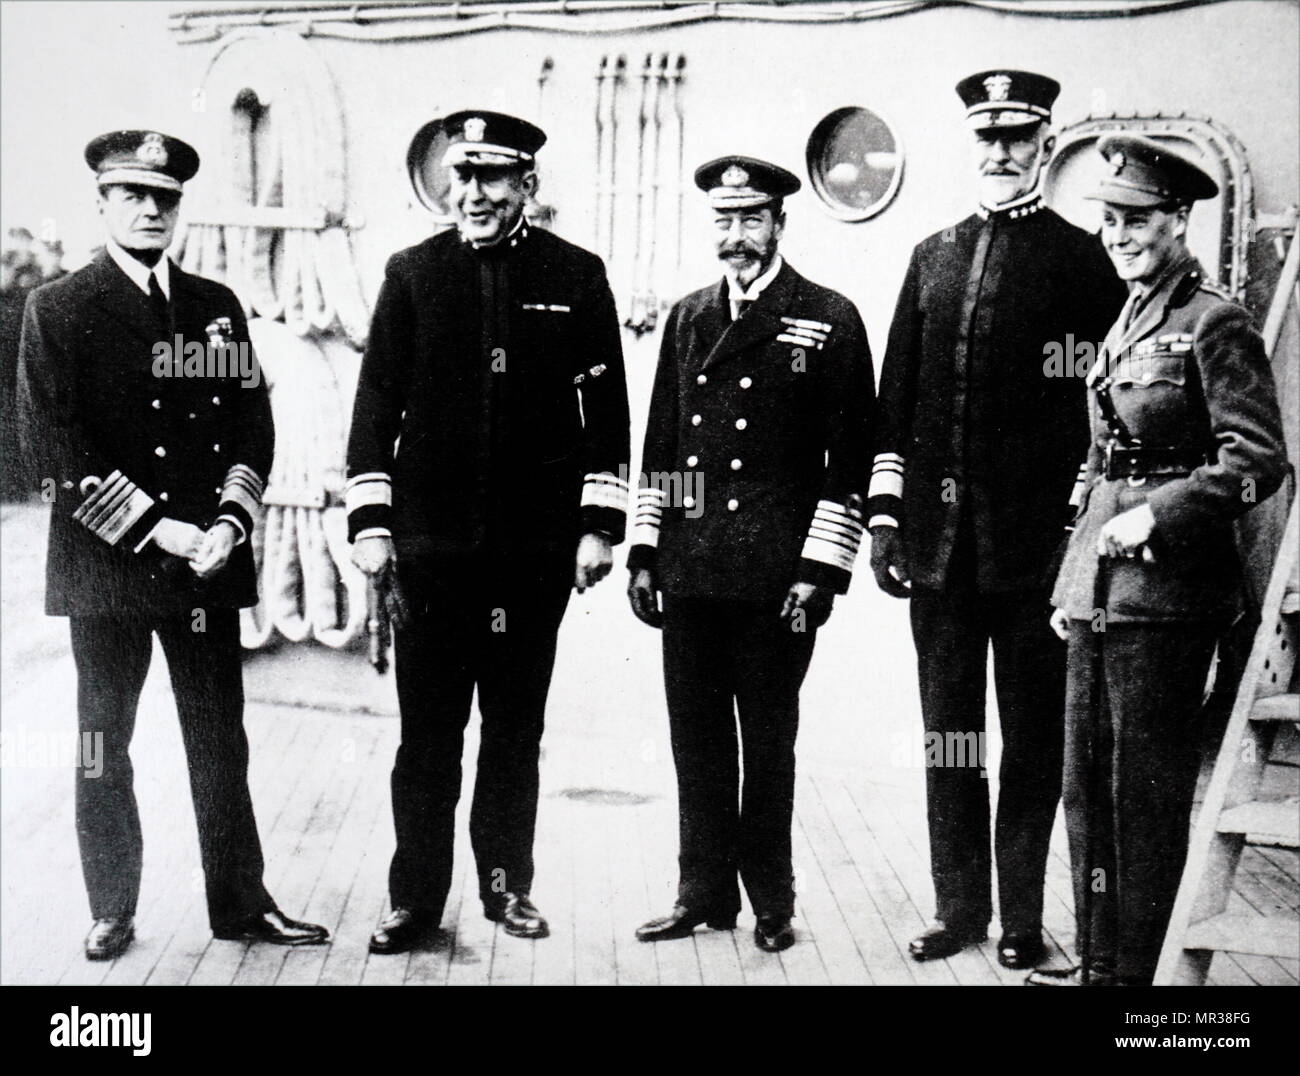 Photograph of US Admirals with King George V. Left to Right: David Beatty, 1st Earl Beatty (1871-1936), Admiral Hugh Rodman (1859-1940), King George V (1865-1936), William Sims (1858-1936), and Edward VIII (1894-1972). Dated 20th century Stock Photo